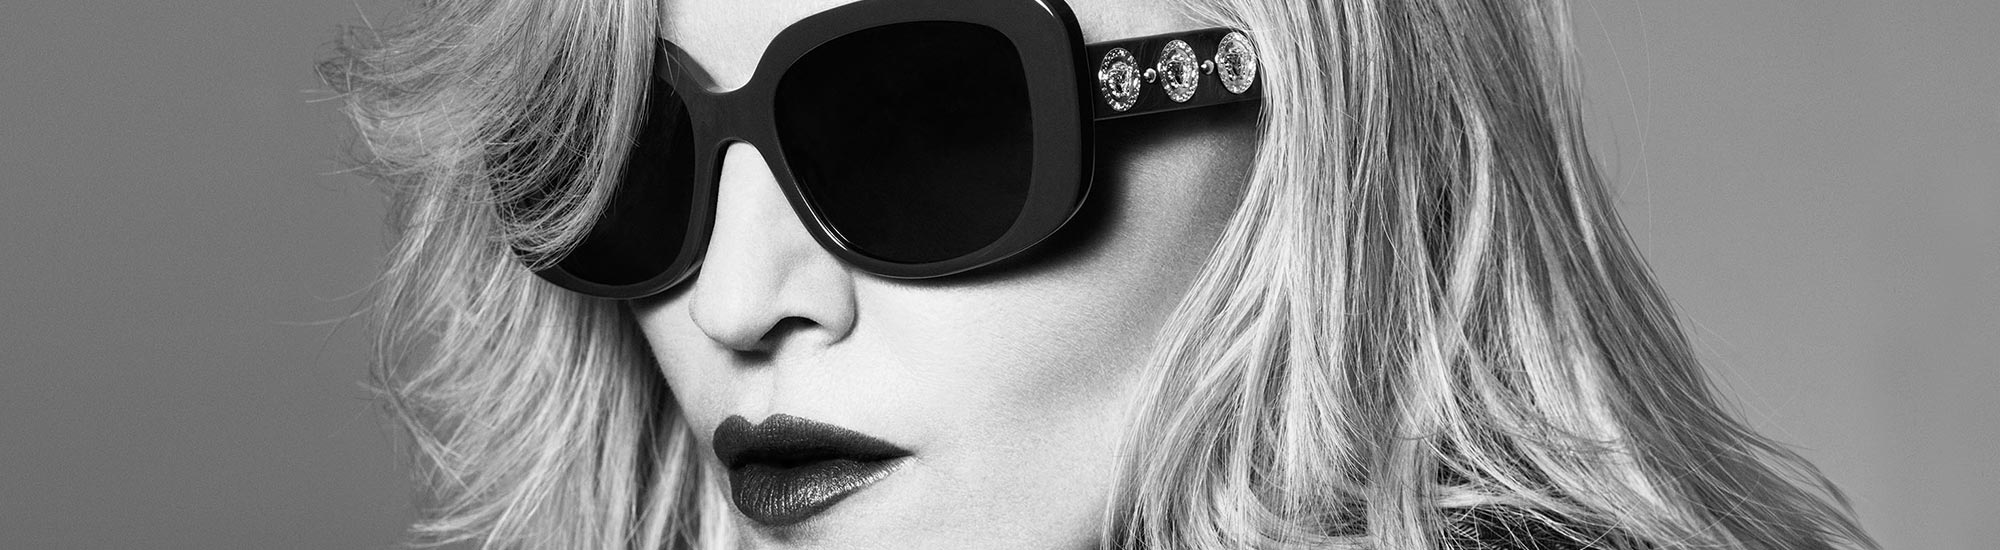 20150208-pictures-madonna-versace-spring